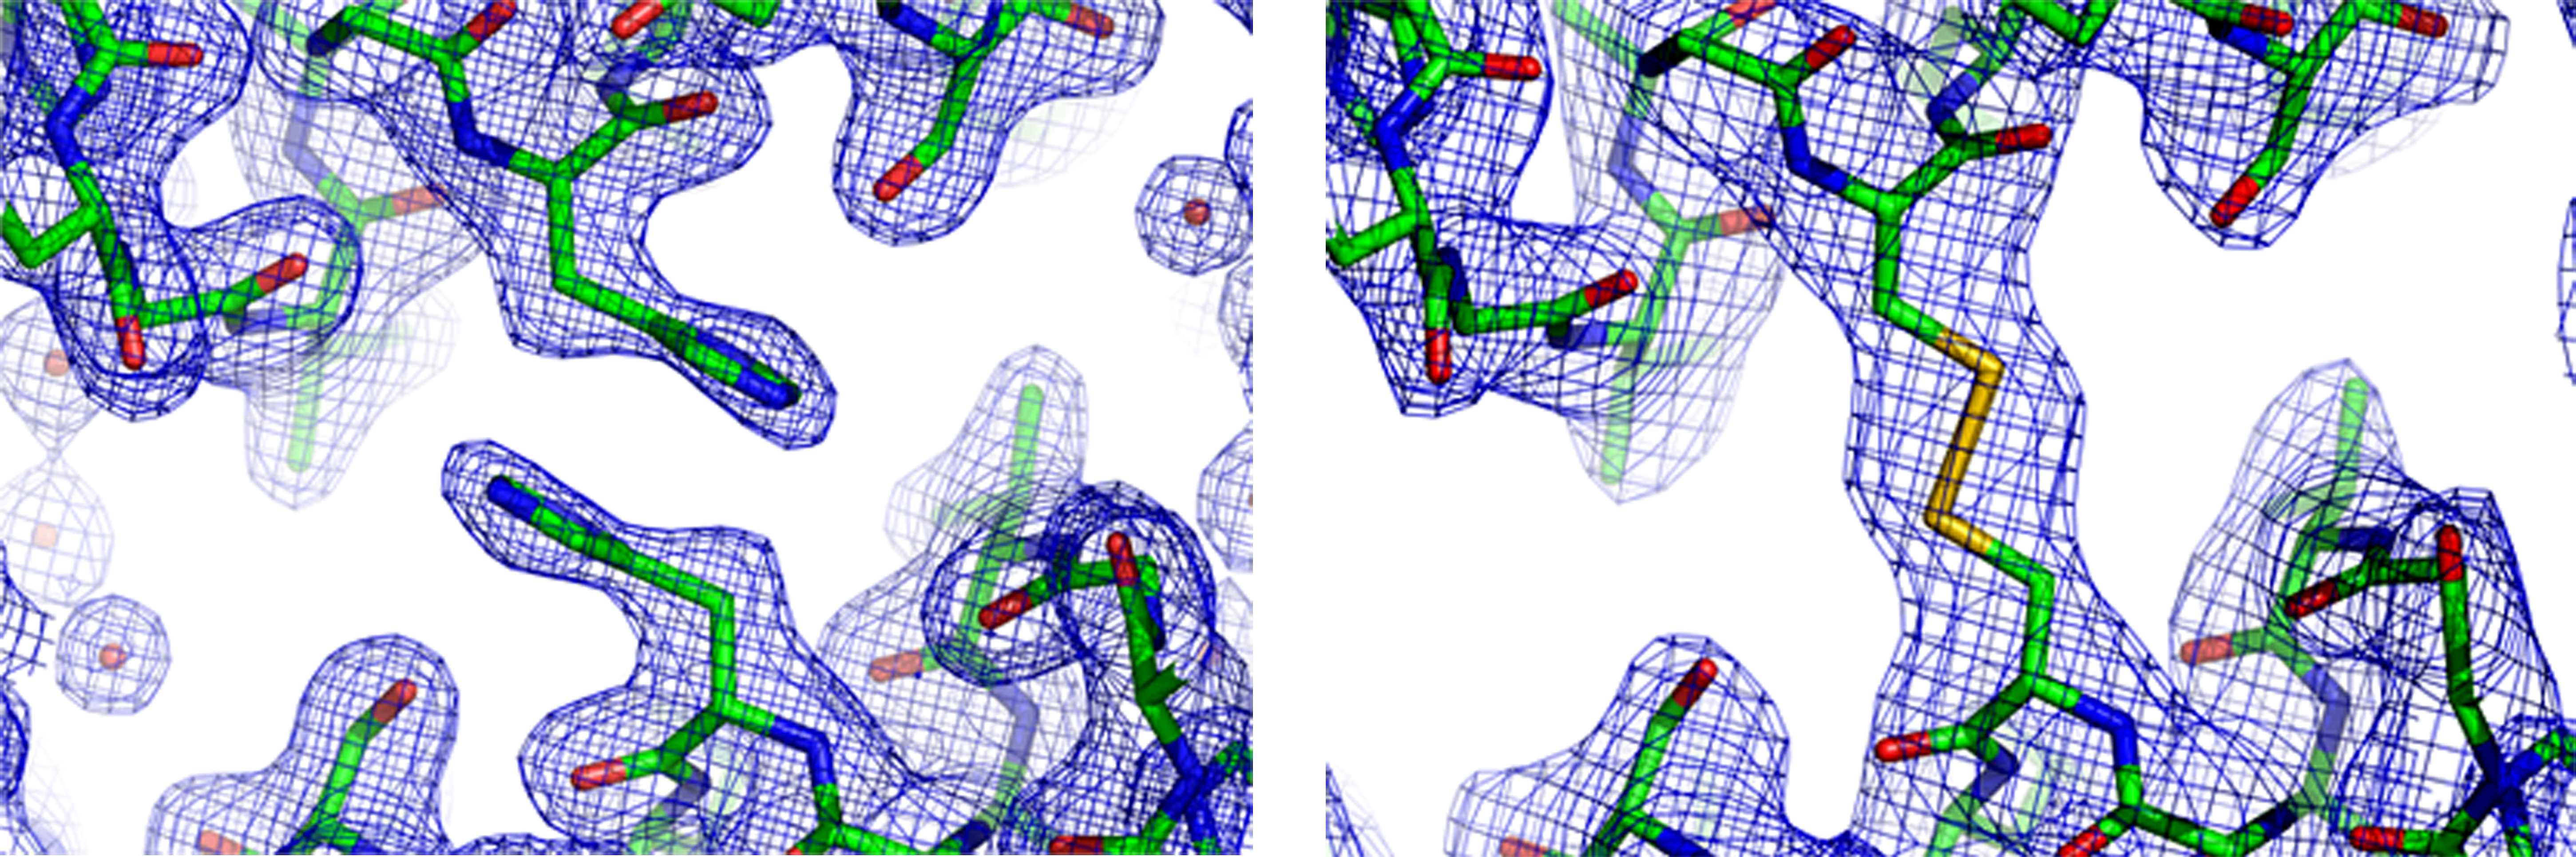 <i>Electron density calculated from the X-ray crystallographic analyses of FMDV serotype A22 ‘empty shells’ shown in the vicinity of the pentamer interface both with and without a modification engineered to ‘fasten’ together the adjacent pentamers.</i>